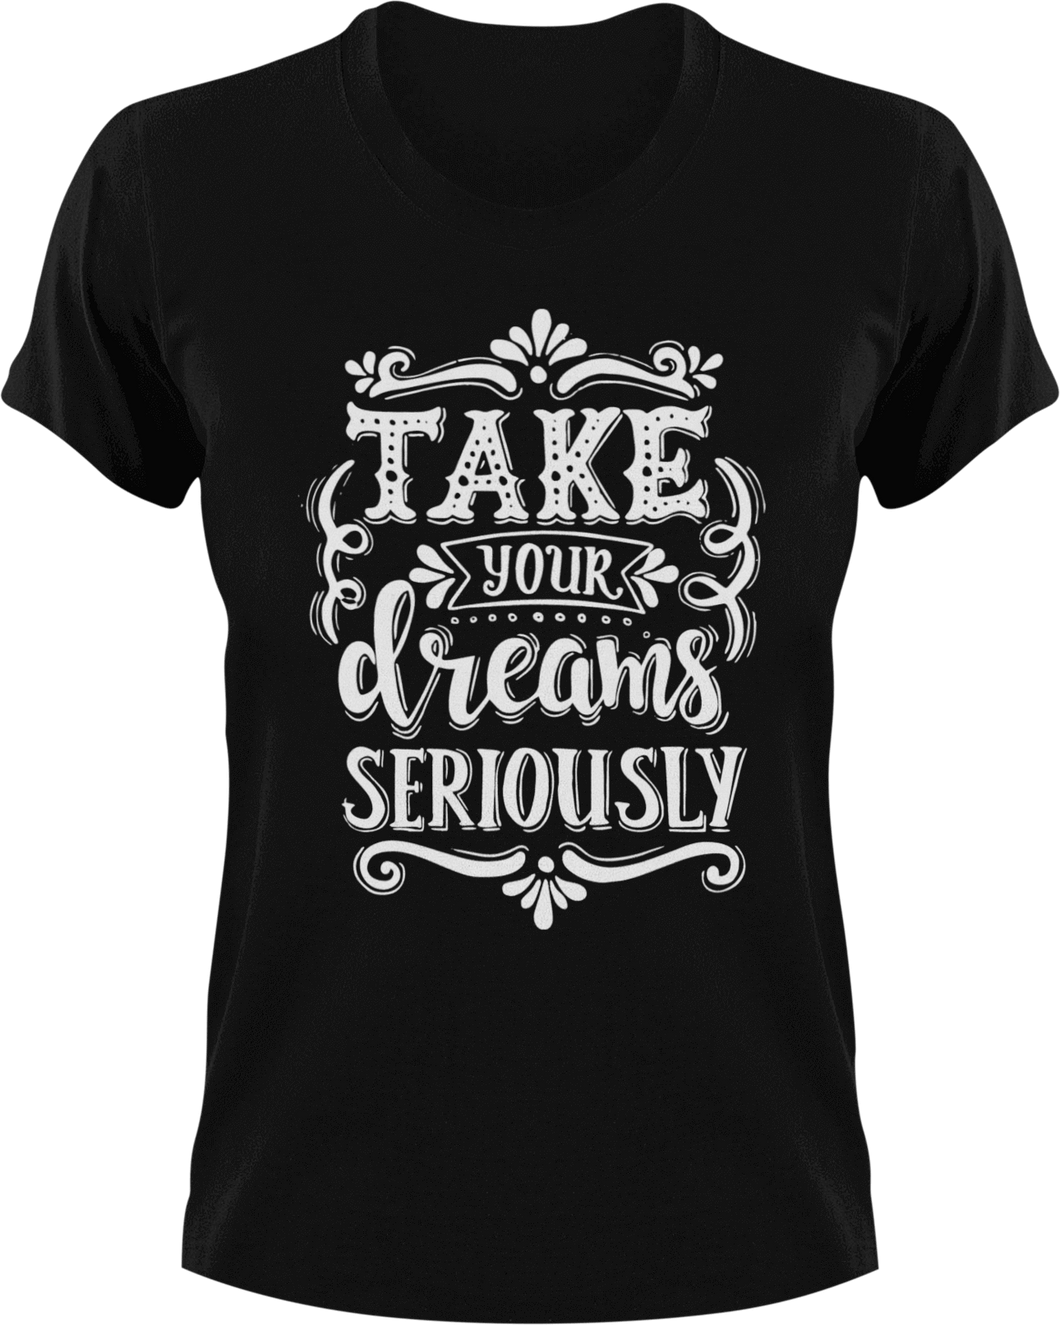 Take your dreams seriously T-Shirtdreams, educational, Ladies, Mens, motivation, Unisex